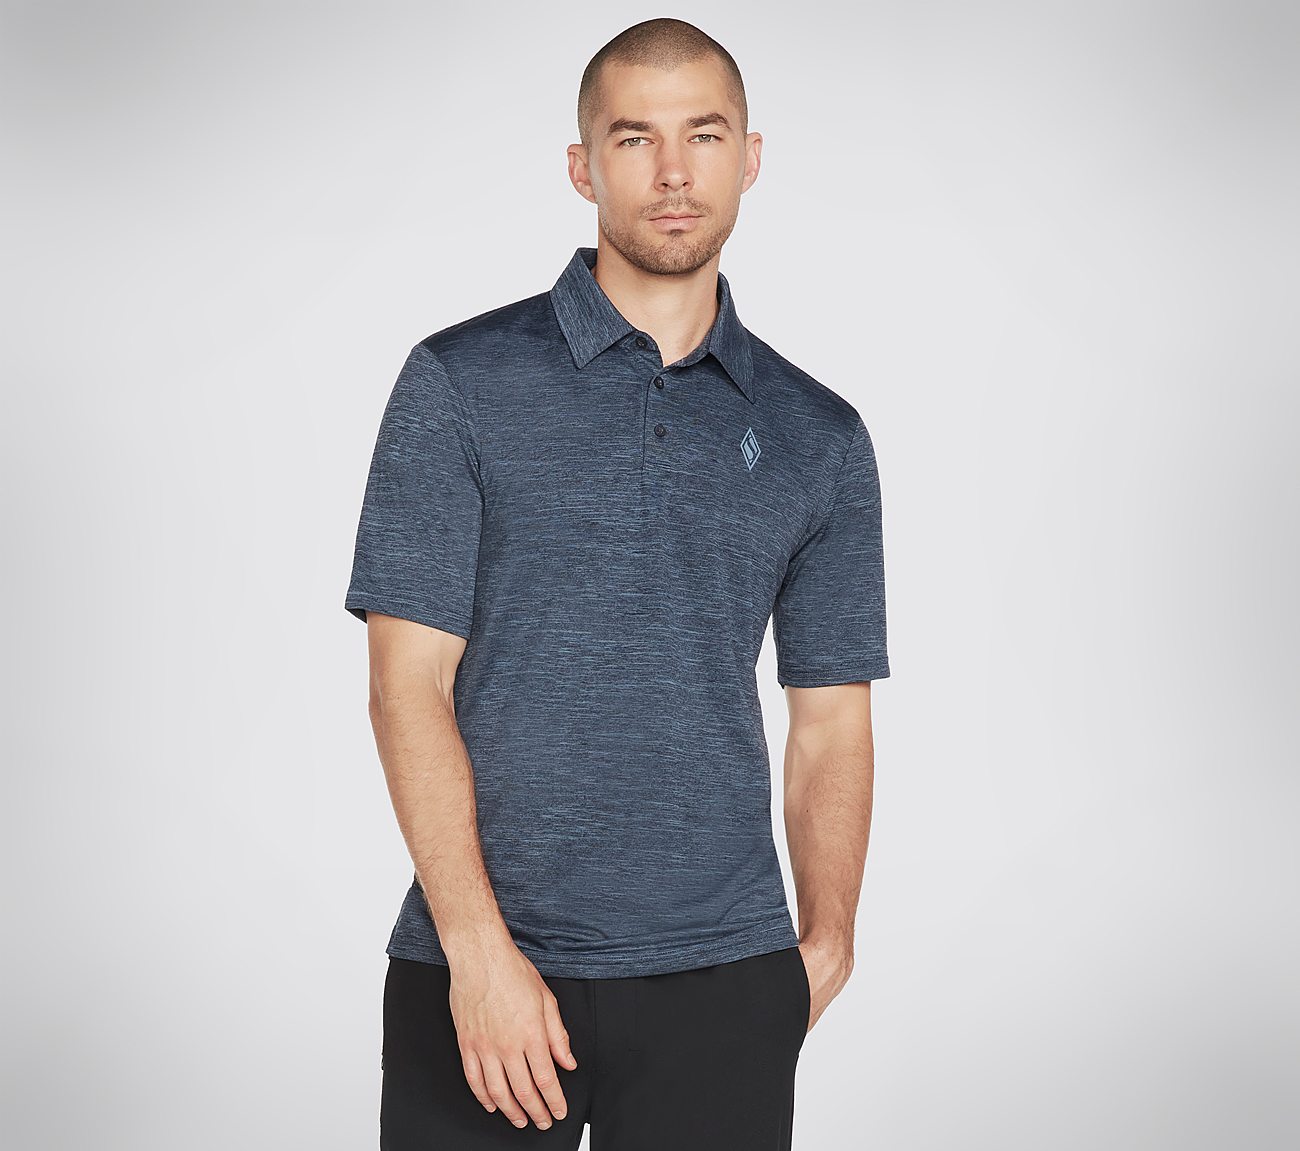 ON THE ROAD POLO, BLUE/GREY Apparel Lateral View